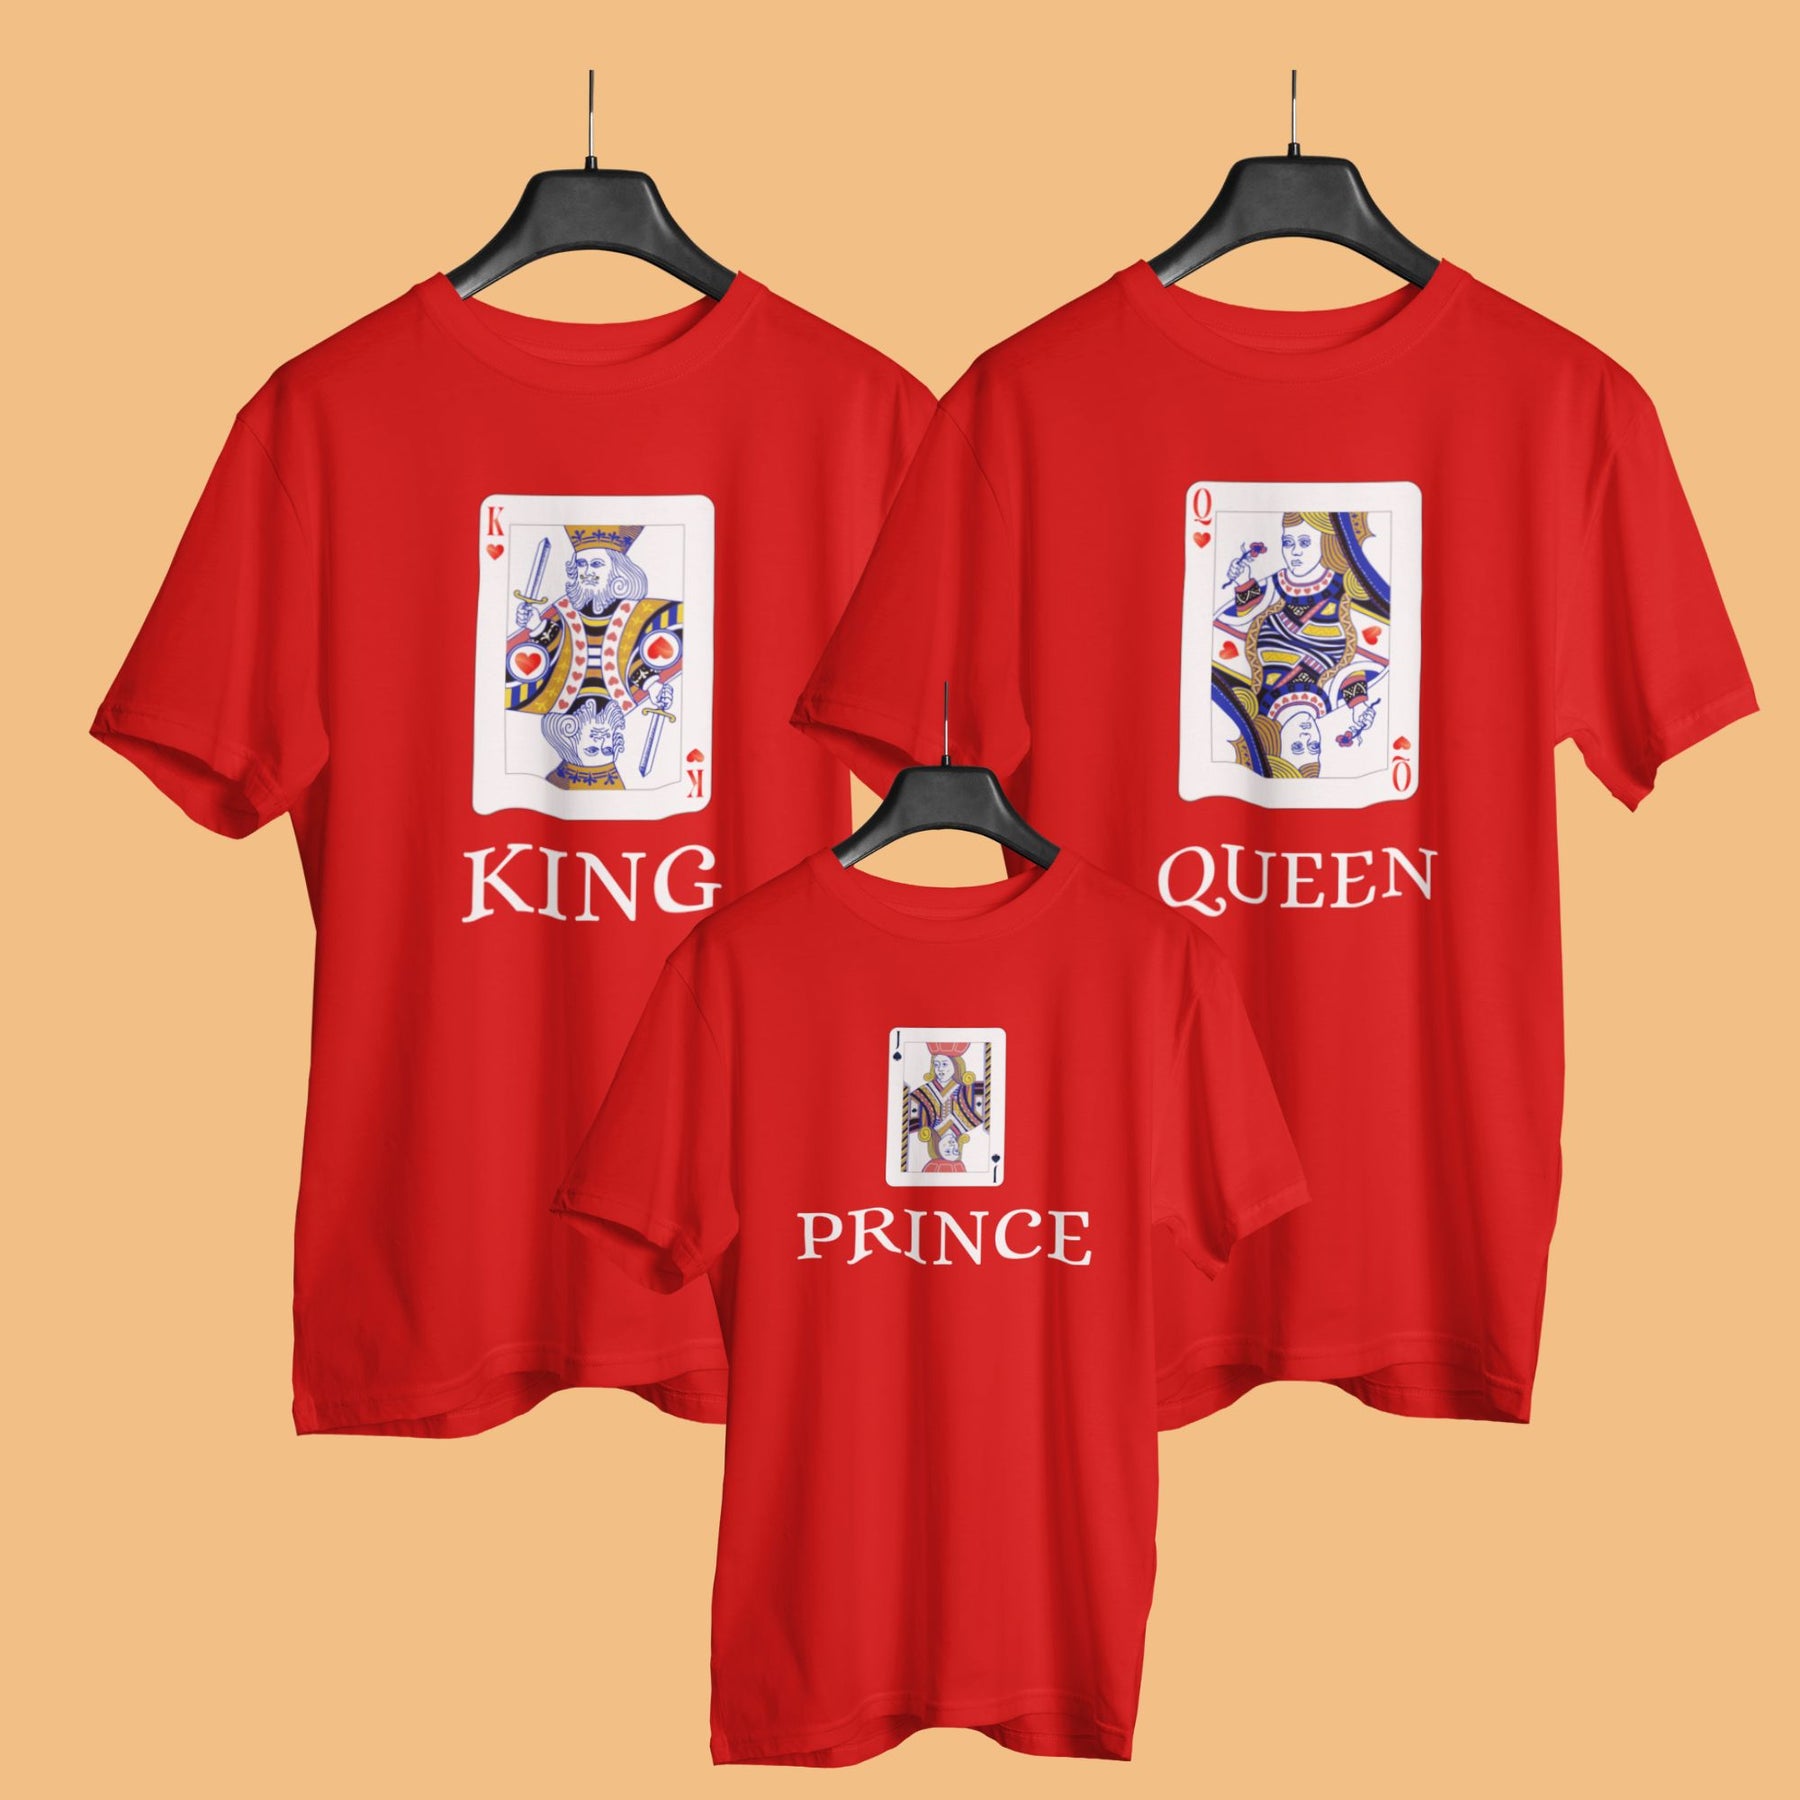 king-matching-family-red-t-shirts-for-mom-dad-daughter-gogirgit-hanger